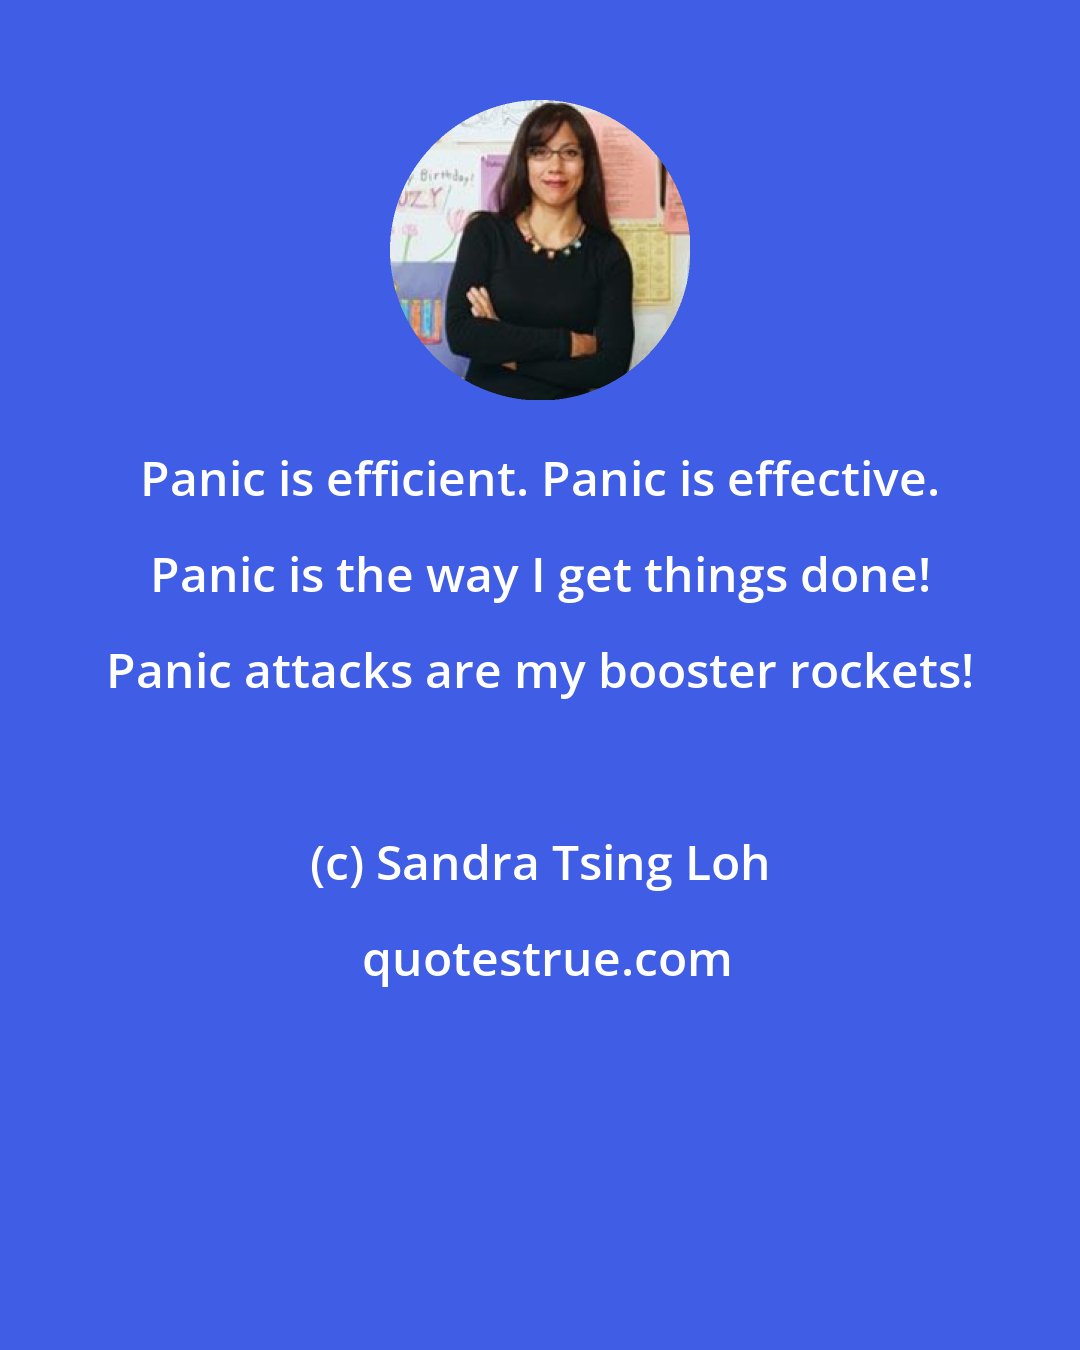 Sandra Tsing Loh: Panic is efficient. Panic is effective. Panic is the way I get things done! Panic attacks are my booster rockets!